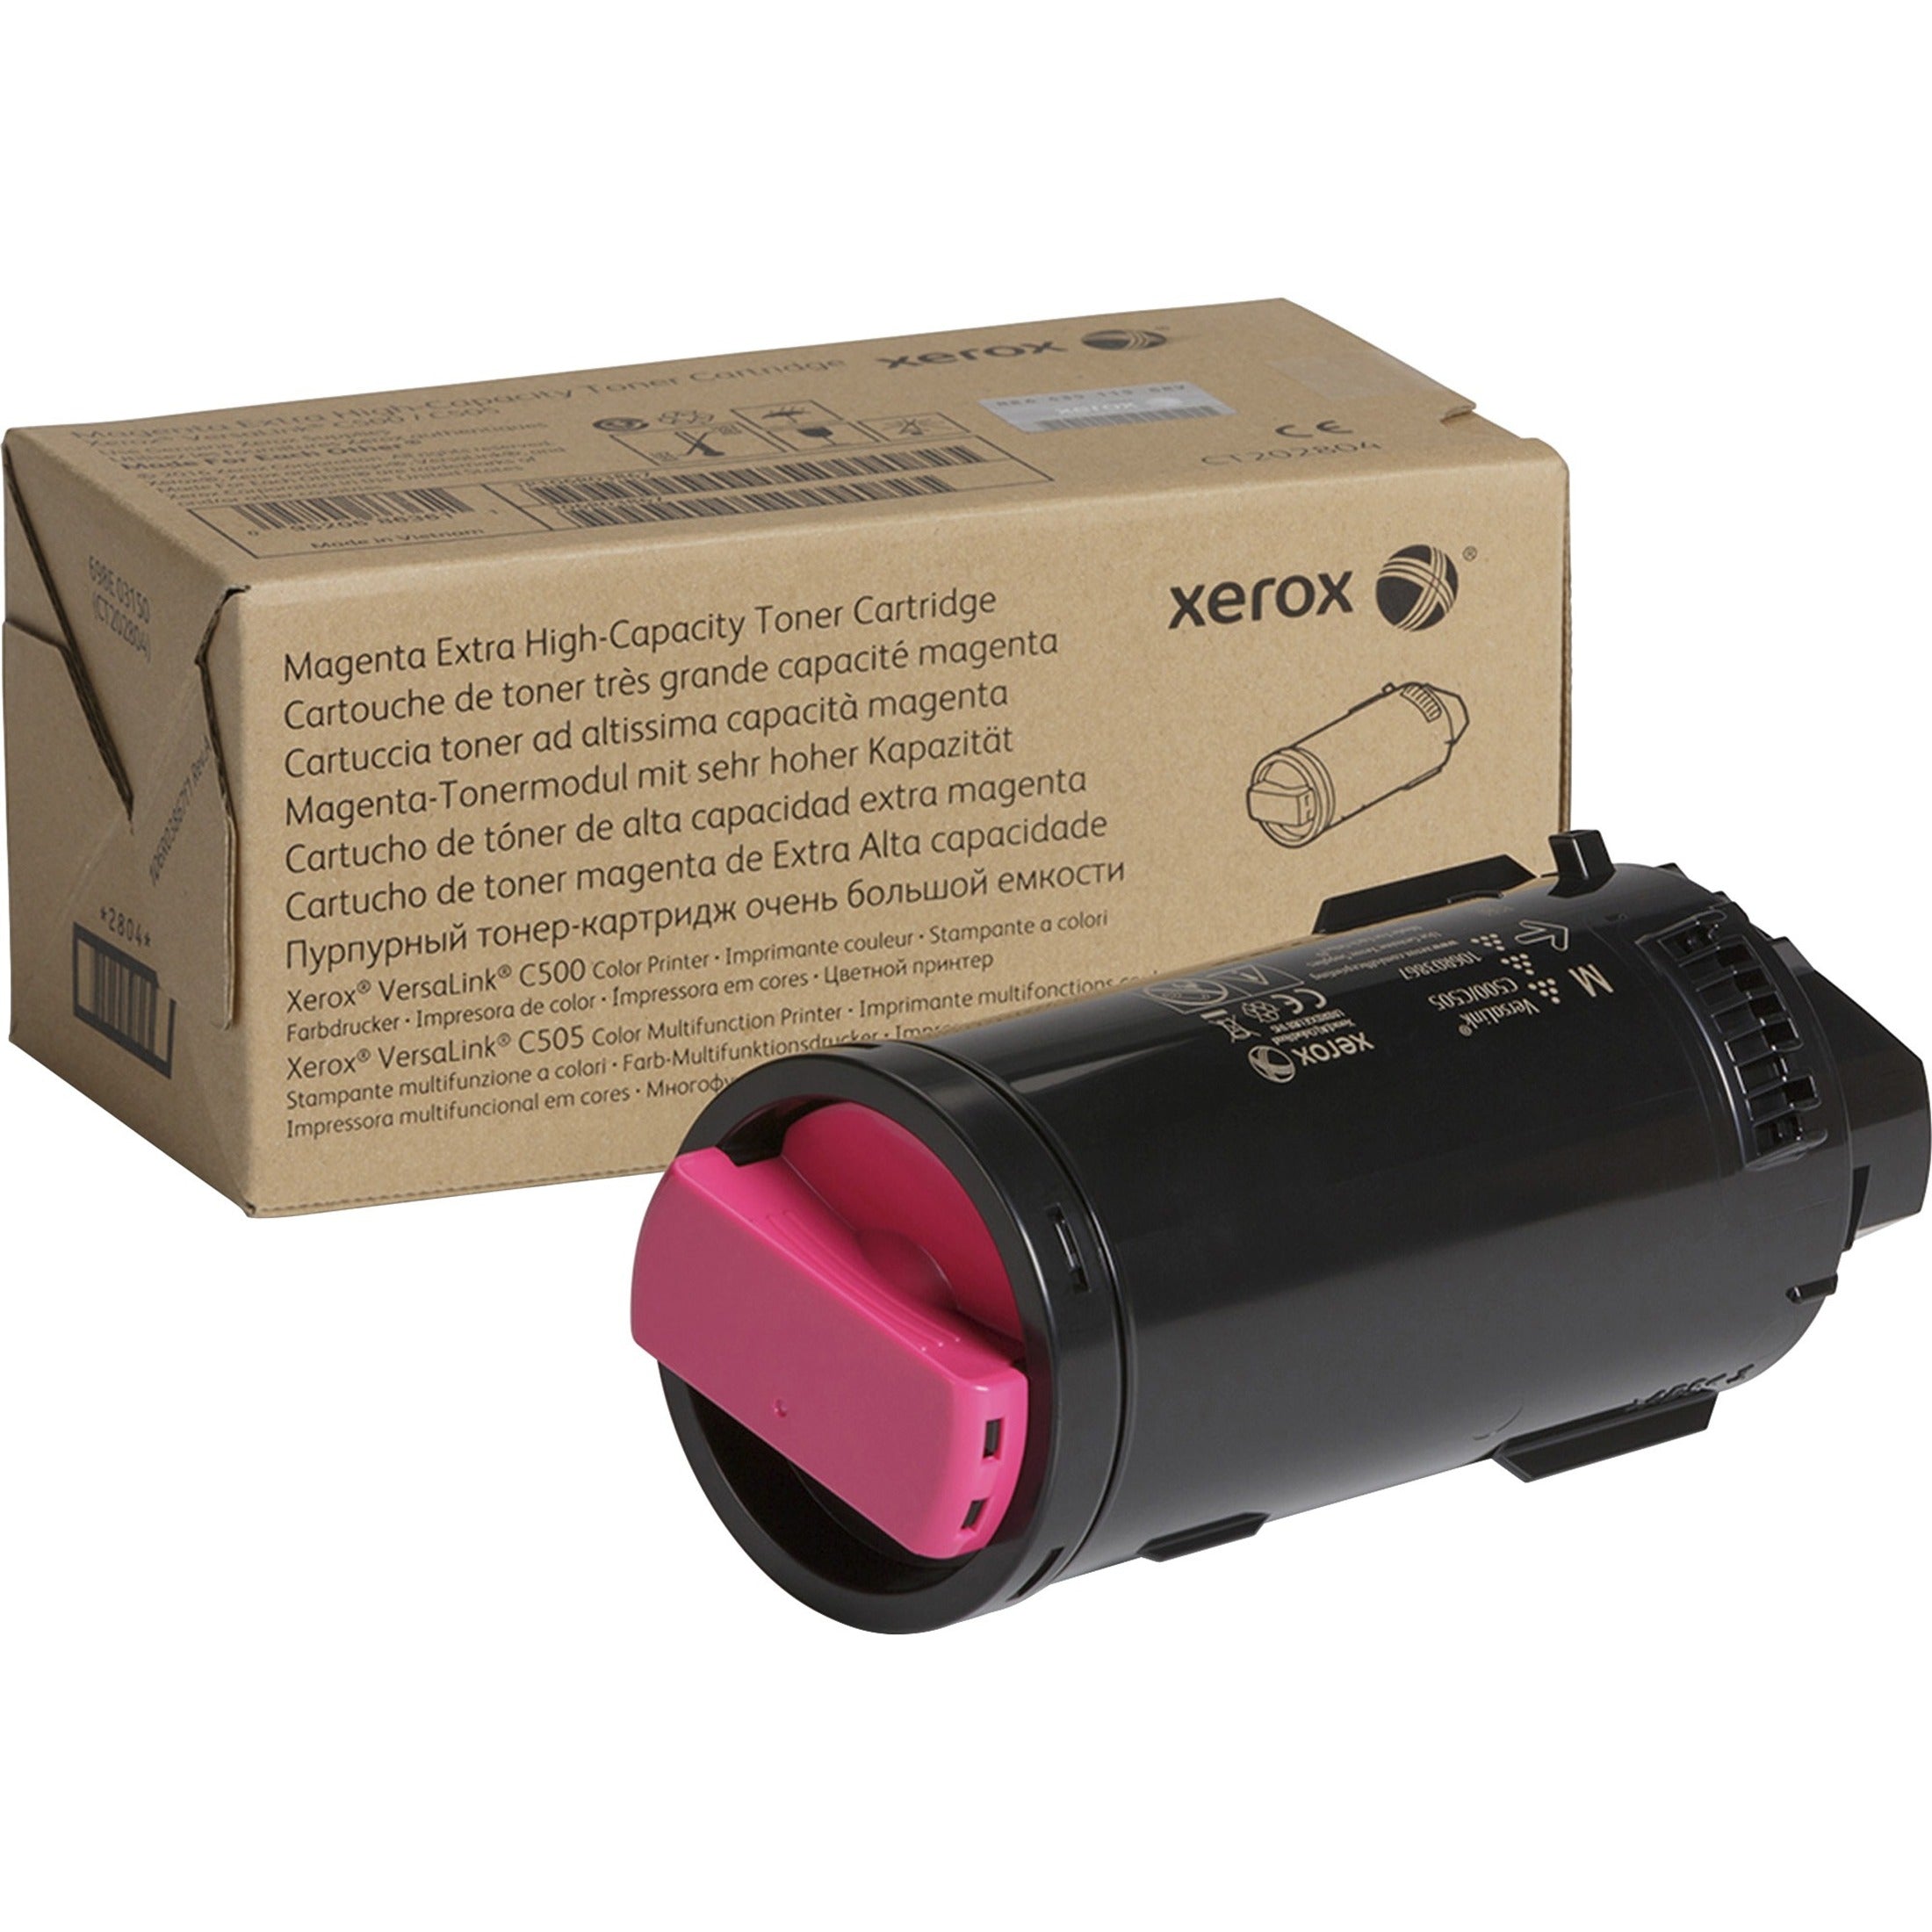 Xerox 106R03867 Genuine Magenta Extra High Capacity Toner Cartridge For The VersaLink C500/C505, 9,000 Pages Yield